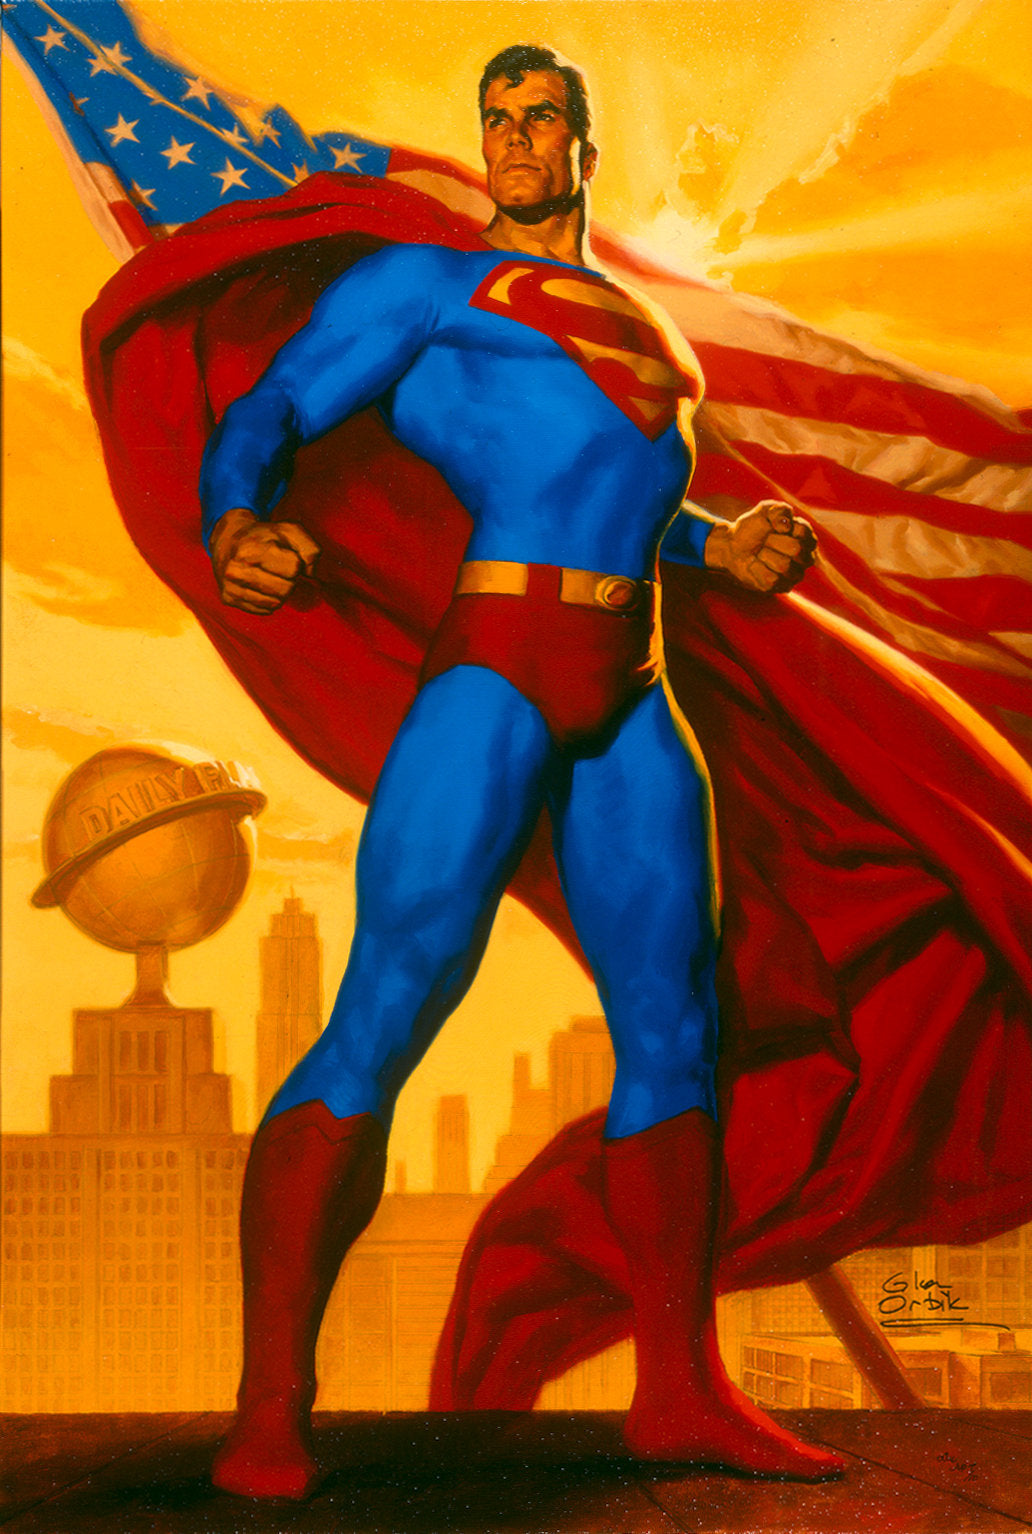 Glen Orbik SIGNED Truth Justice and the American Way Superman DC Giclee on Paper Limited Ed of 250